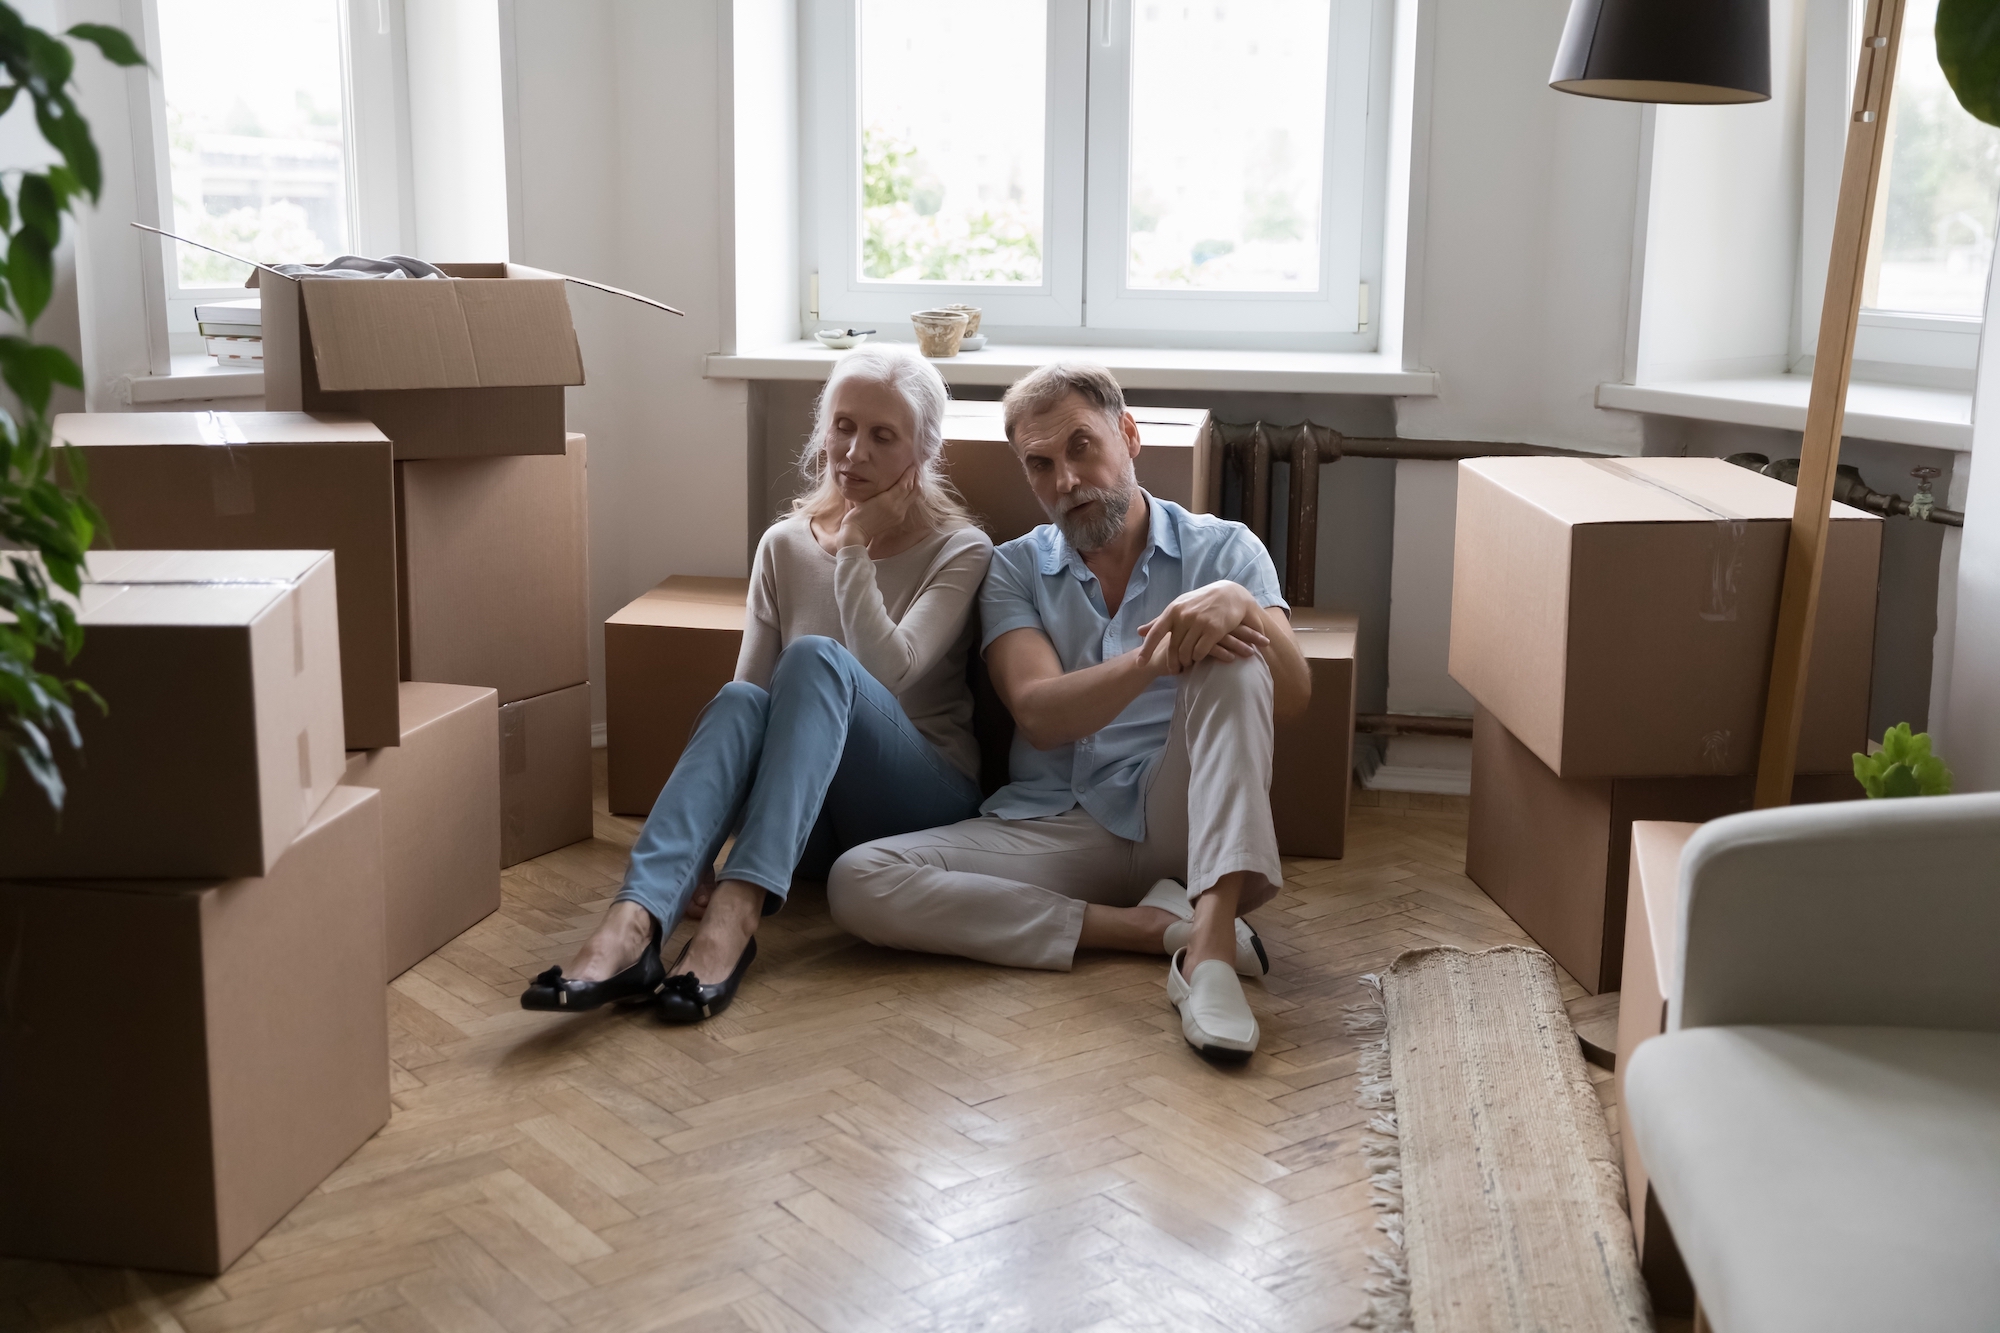 Older couple sit in a dark room with lots of moving boxes around and look depressed